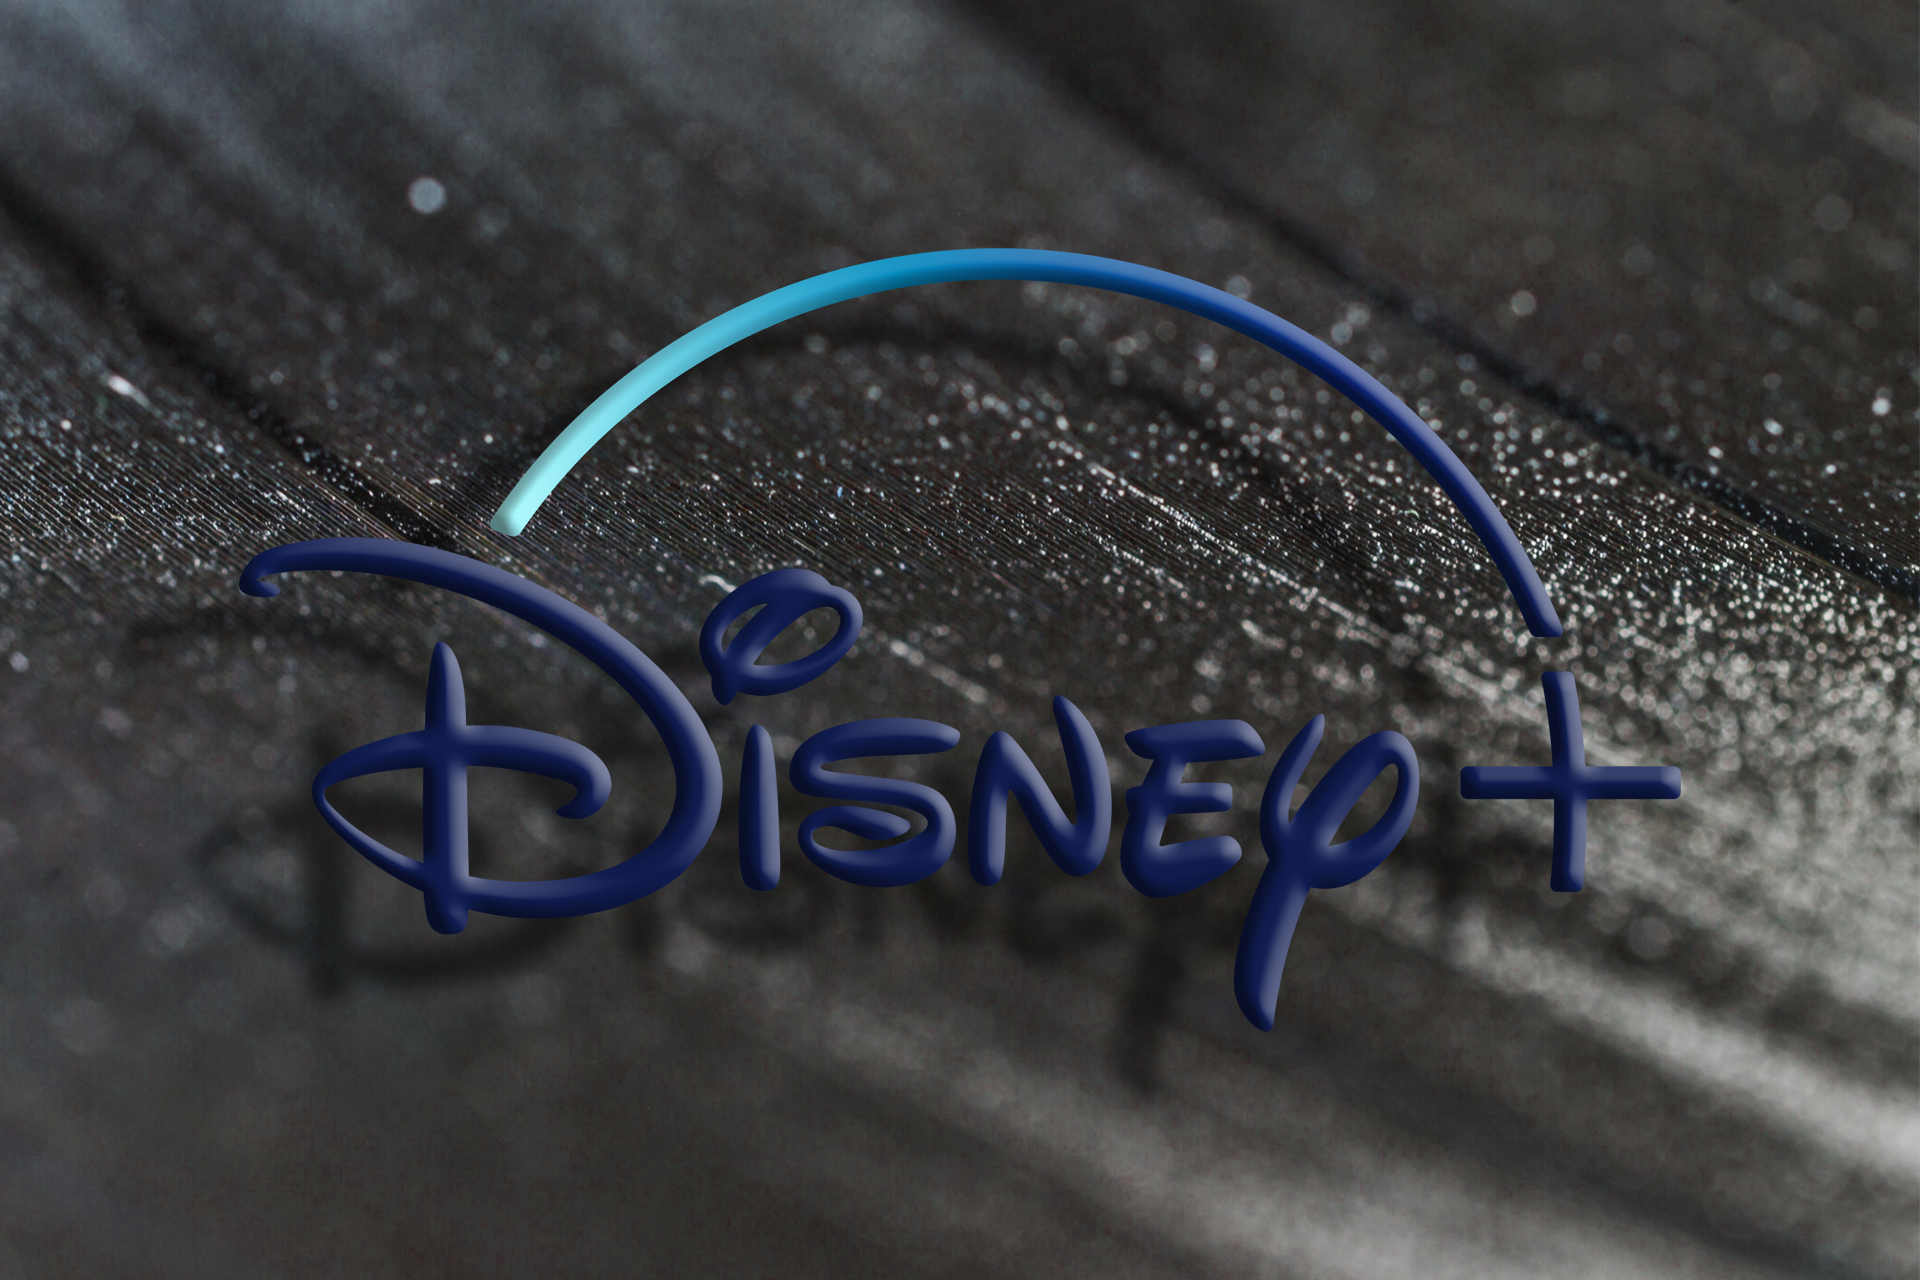 Disney Plus not loading on Mac? Use these methods to fix